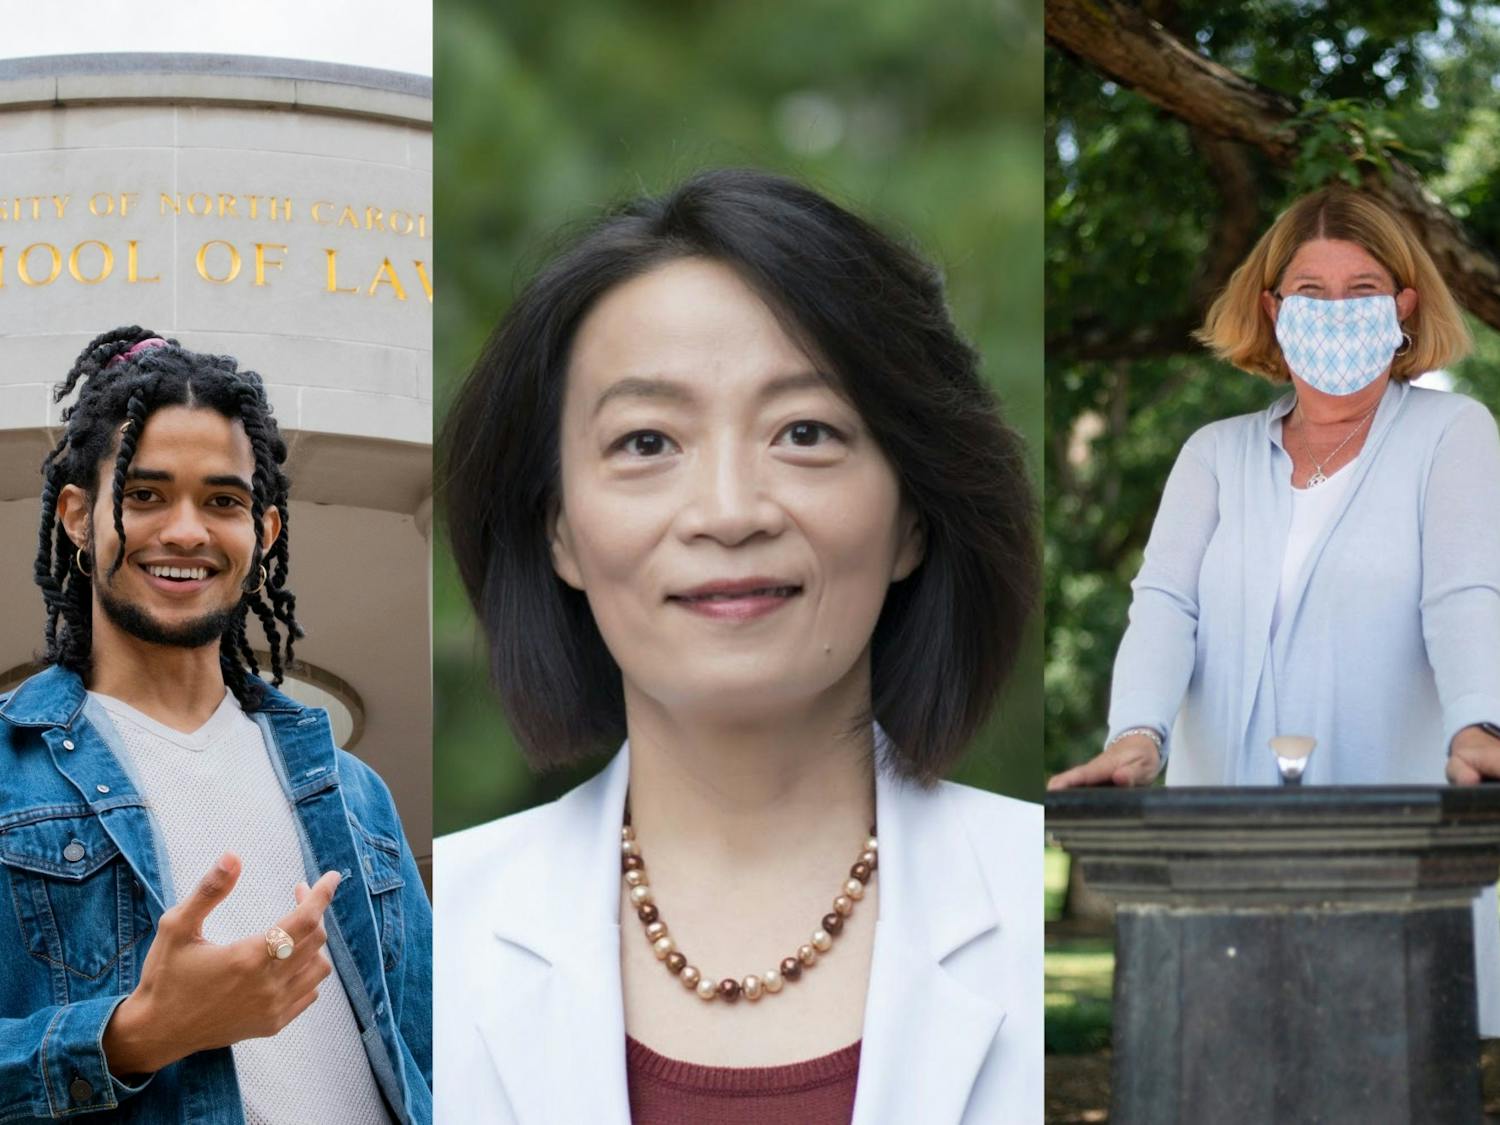 Zachary Boyce (left) and Hongbin Gu (middle) are running against incumbent Pam Hemminger (right) for Chapel Hill mayor this November. Middle photo courtesy of Hongbin Gu.